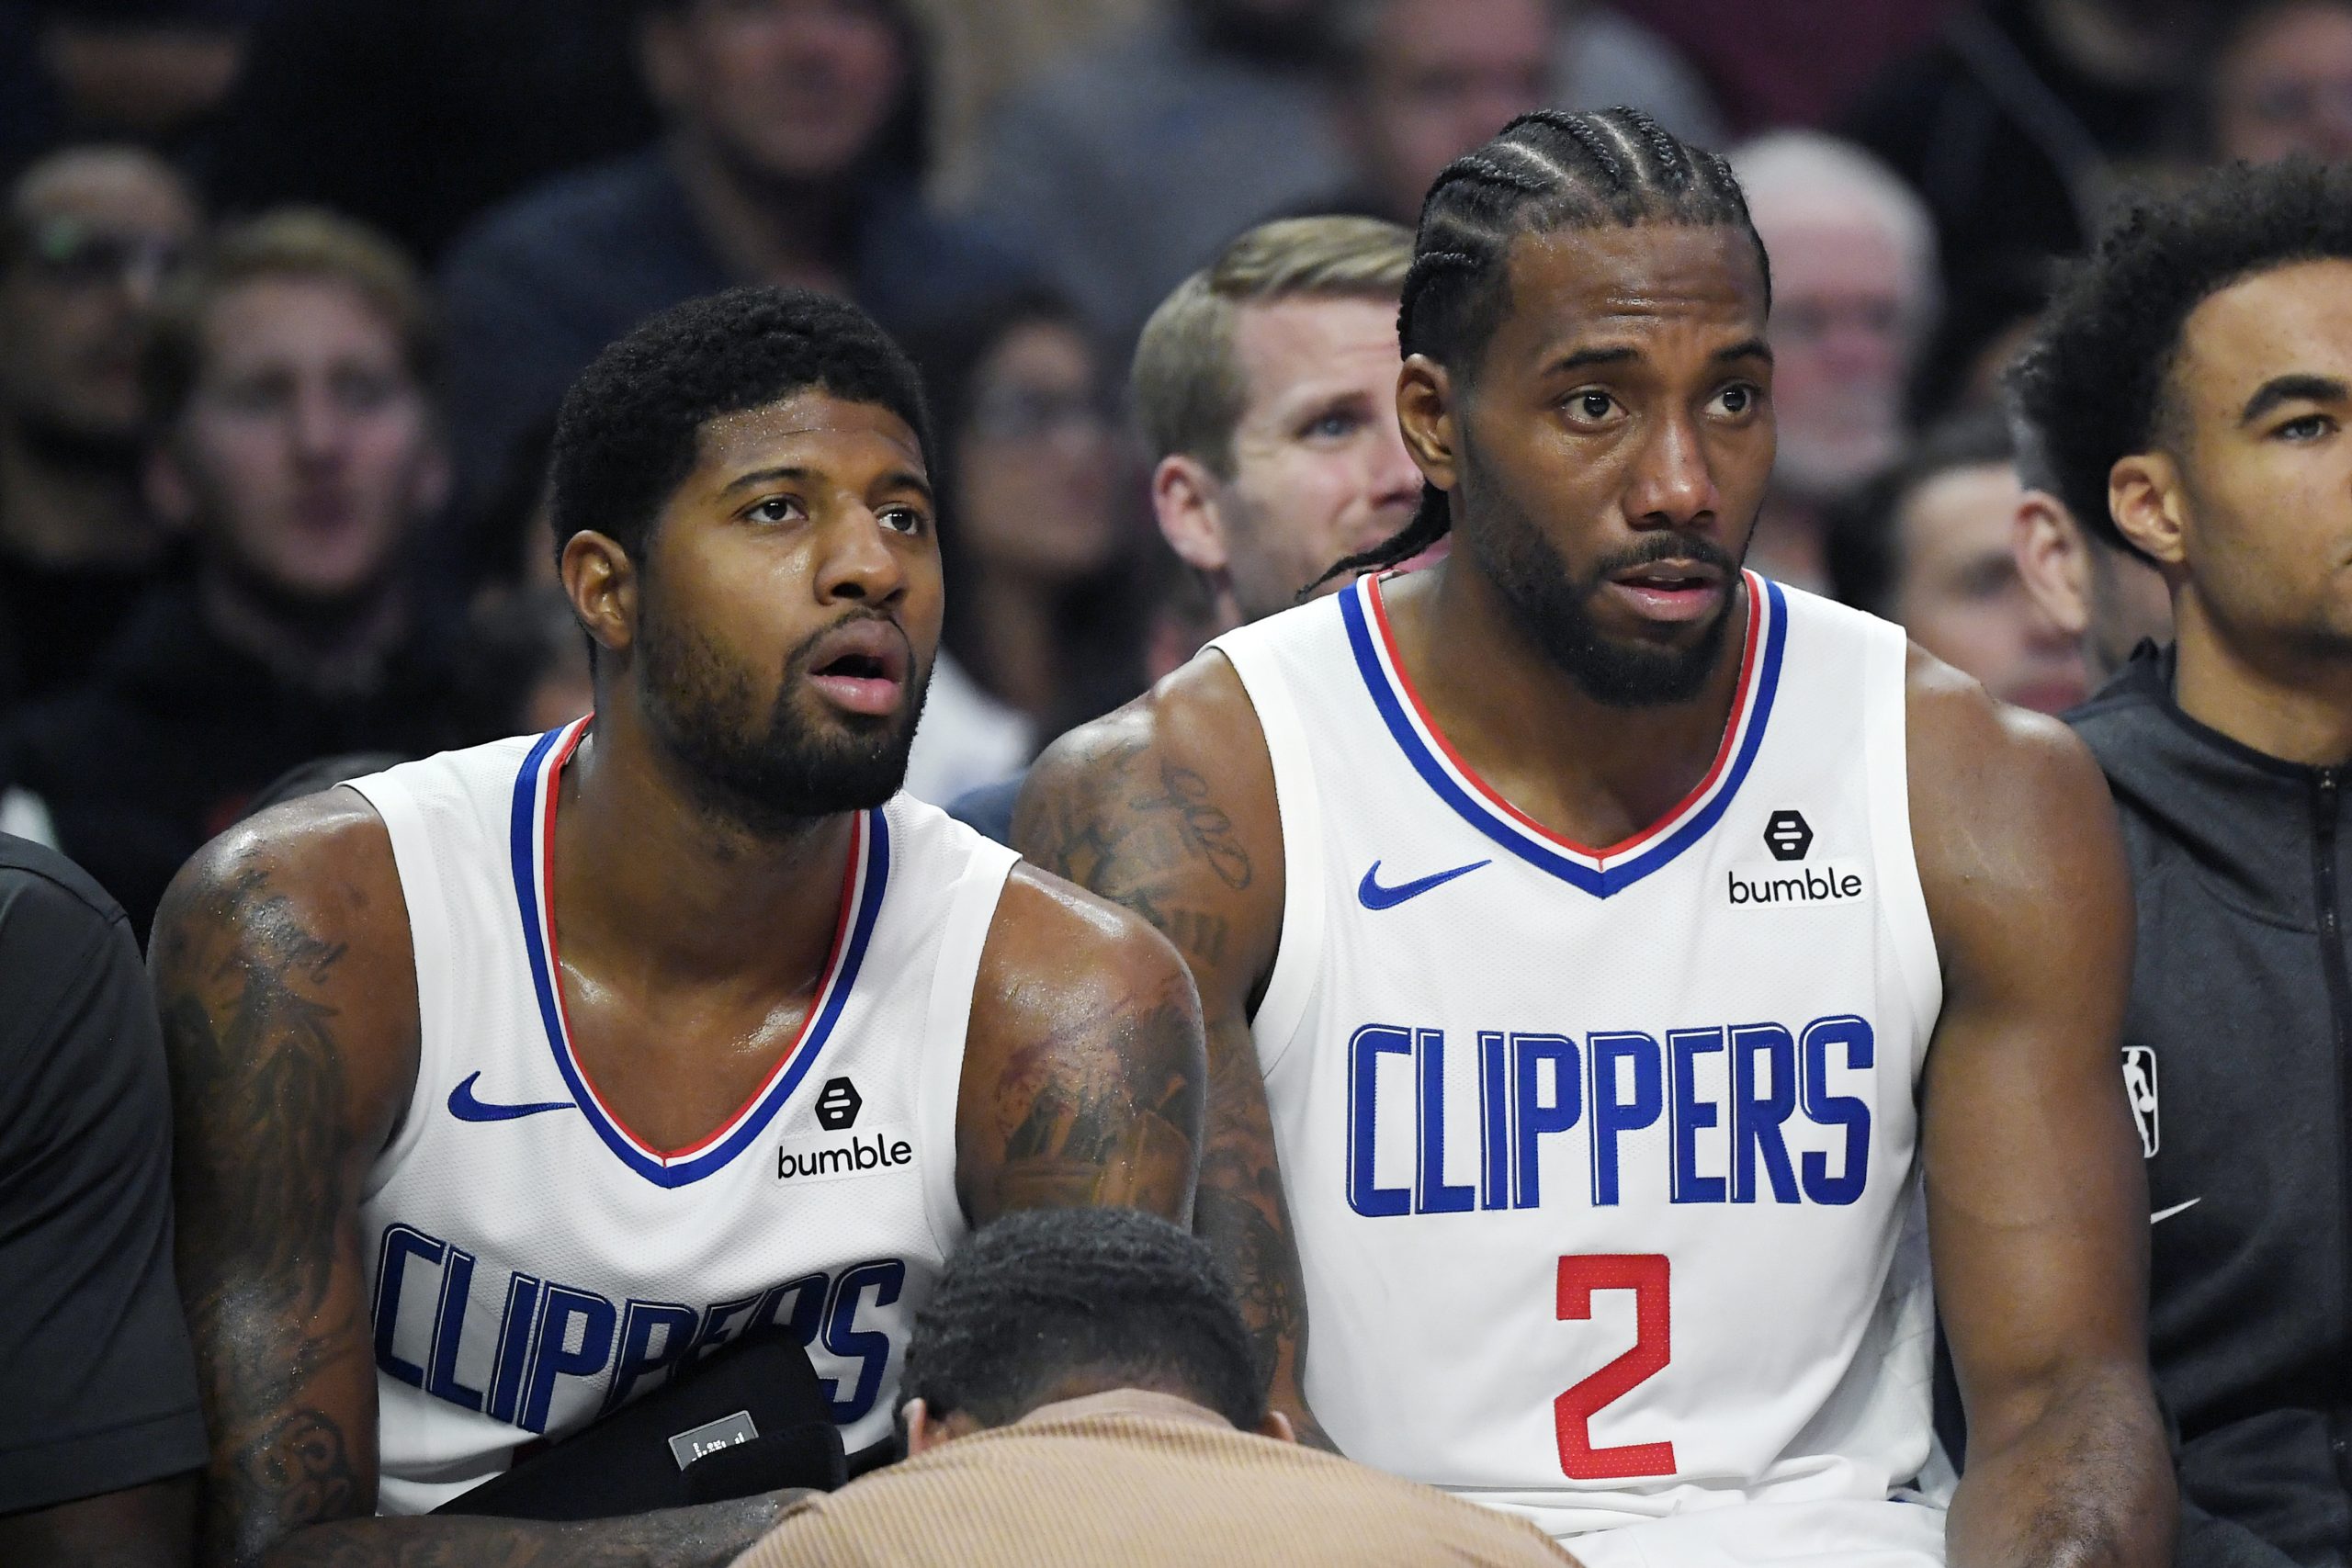 According to The Ringer's Bill Simmons, Kawhi Leonard and Paul George could be returning to the Clippers by the time the NBA Playoffs begin